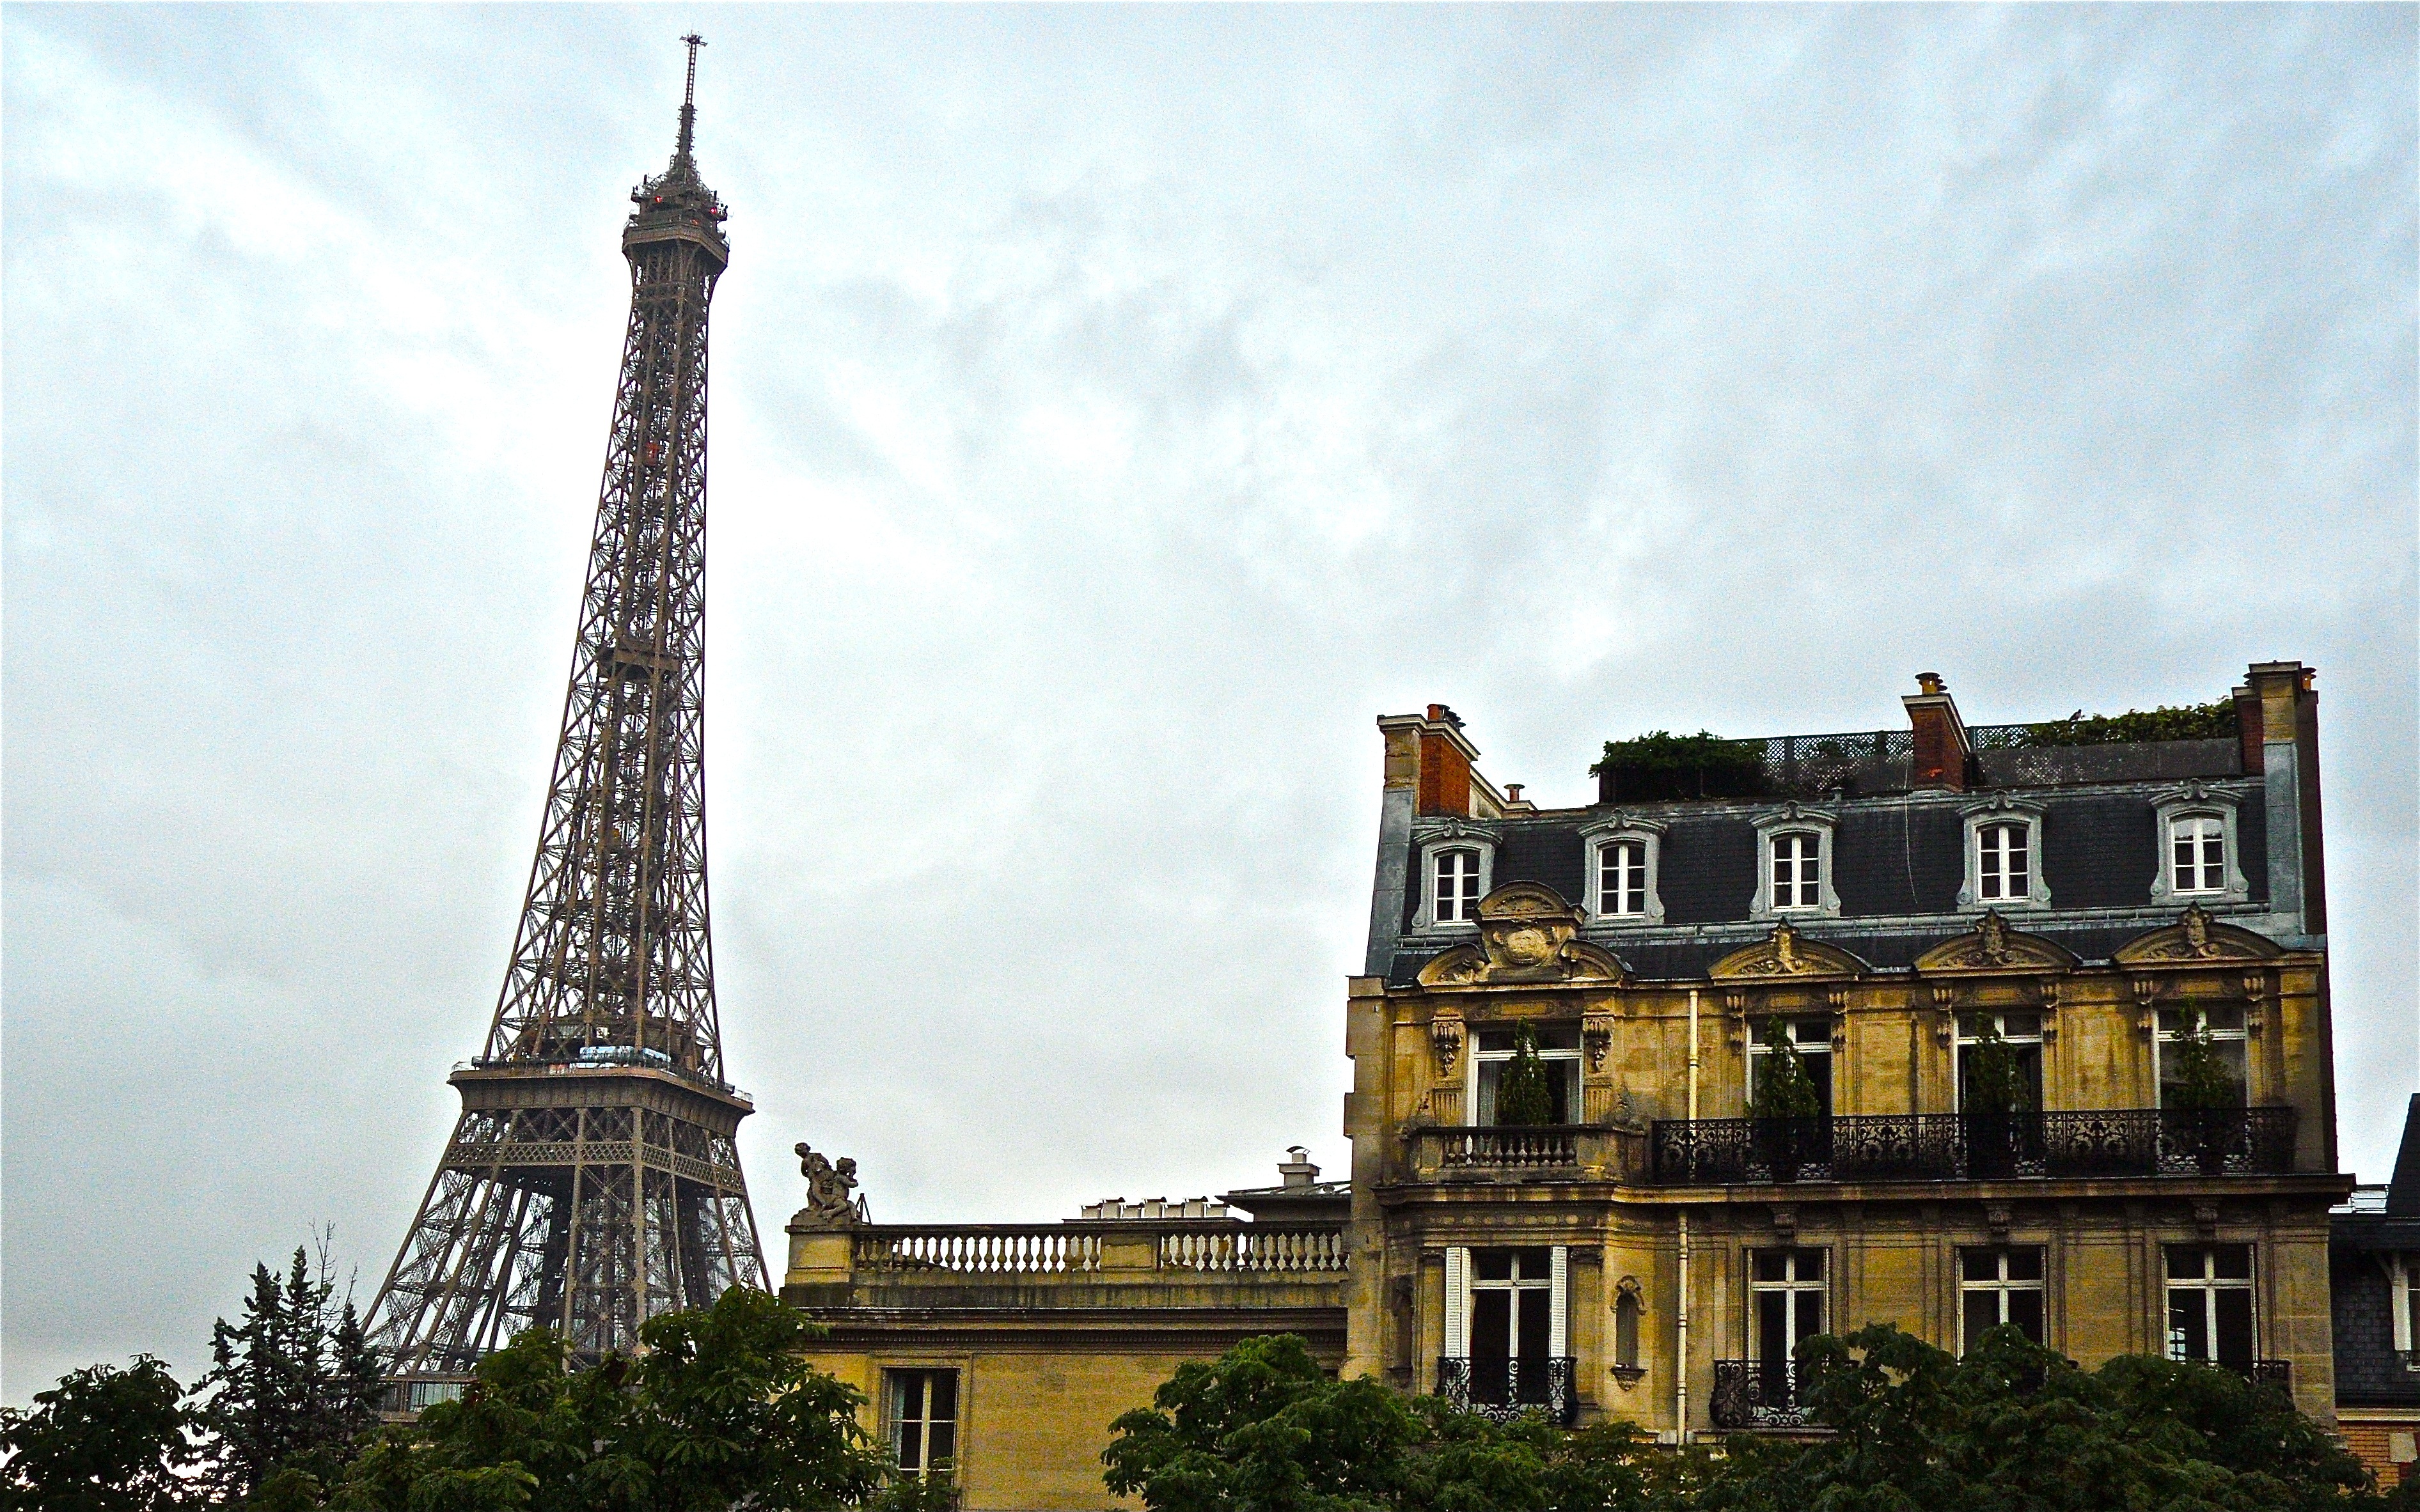 Summer Storm in Paris with the Eiffel Tower, a house, and man-made structures.